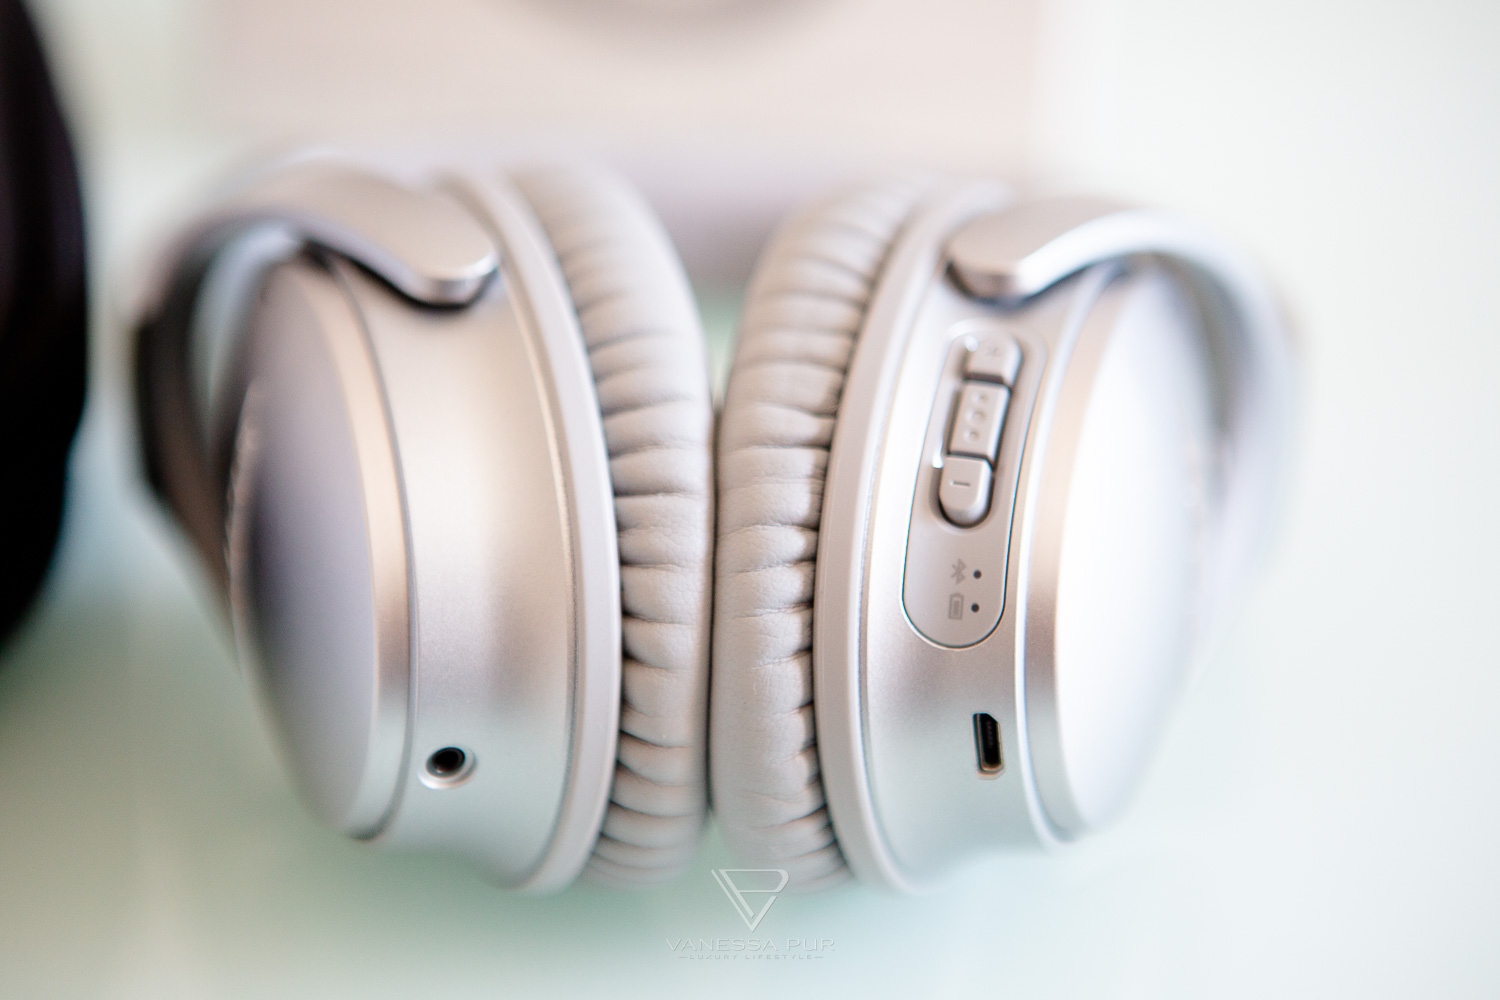 BOSE QUIET COMFORT QC35 - Noise cancelling - Review - Tech blog - Tech blogger - Headset - Music, video, television - Bluetooth headphones in review